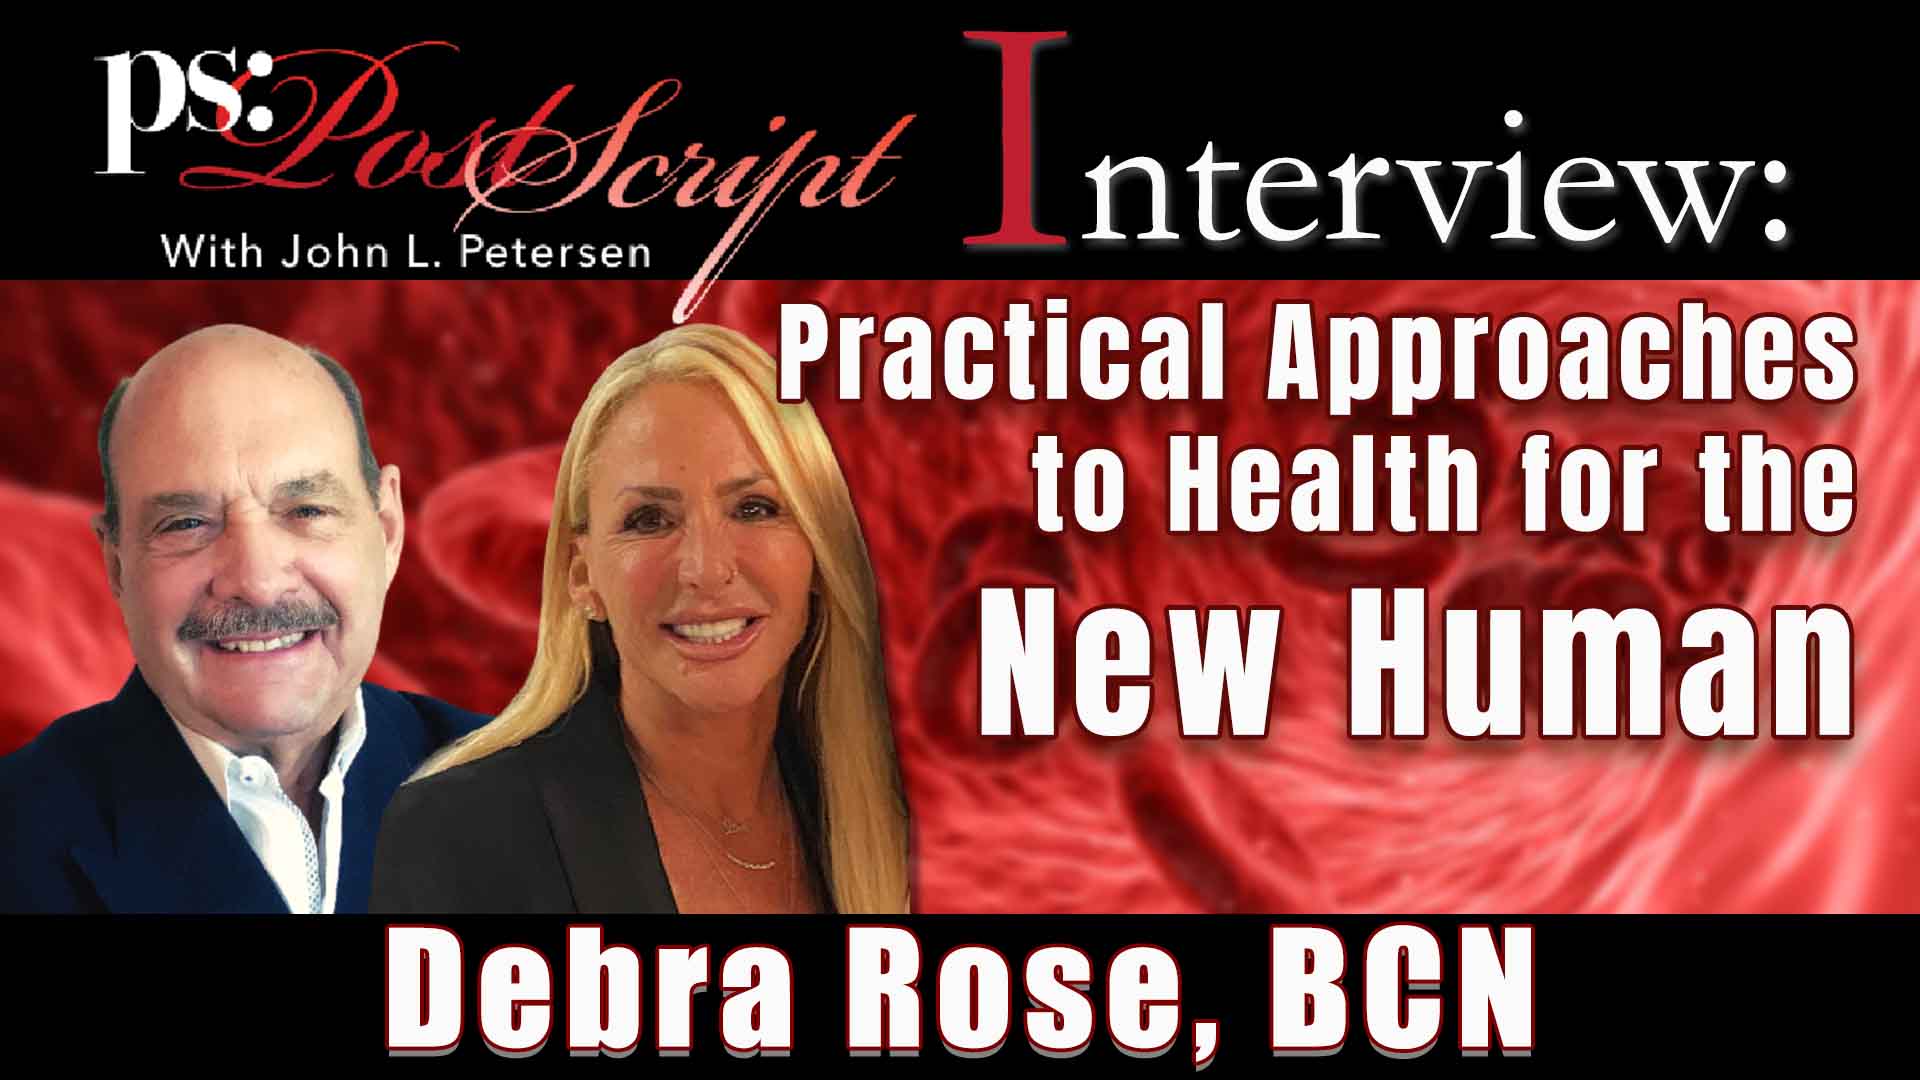 Interview with Debra Rose, Practical approaches to health for the New Human